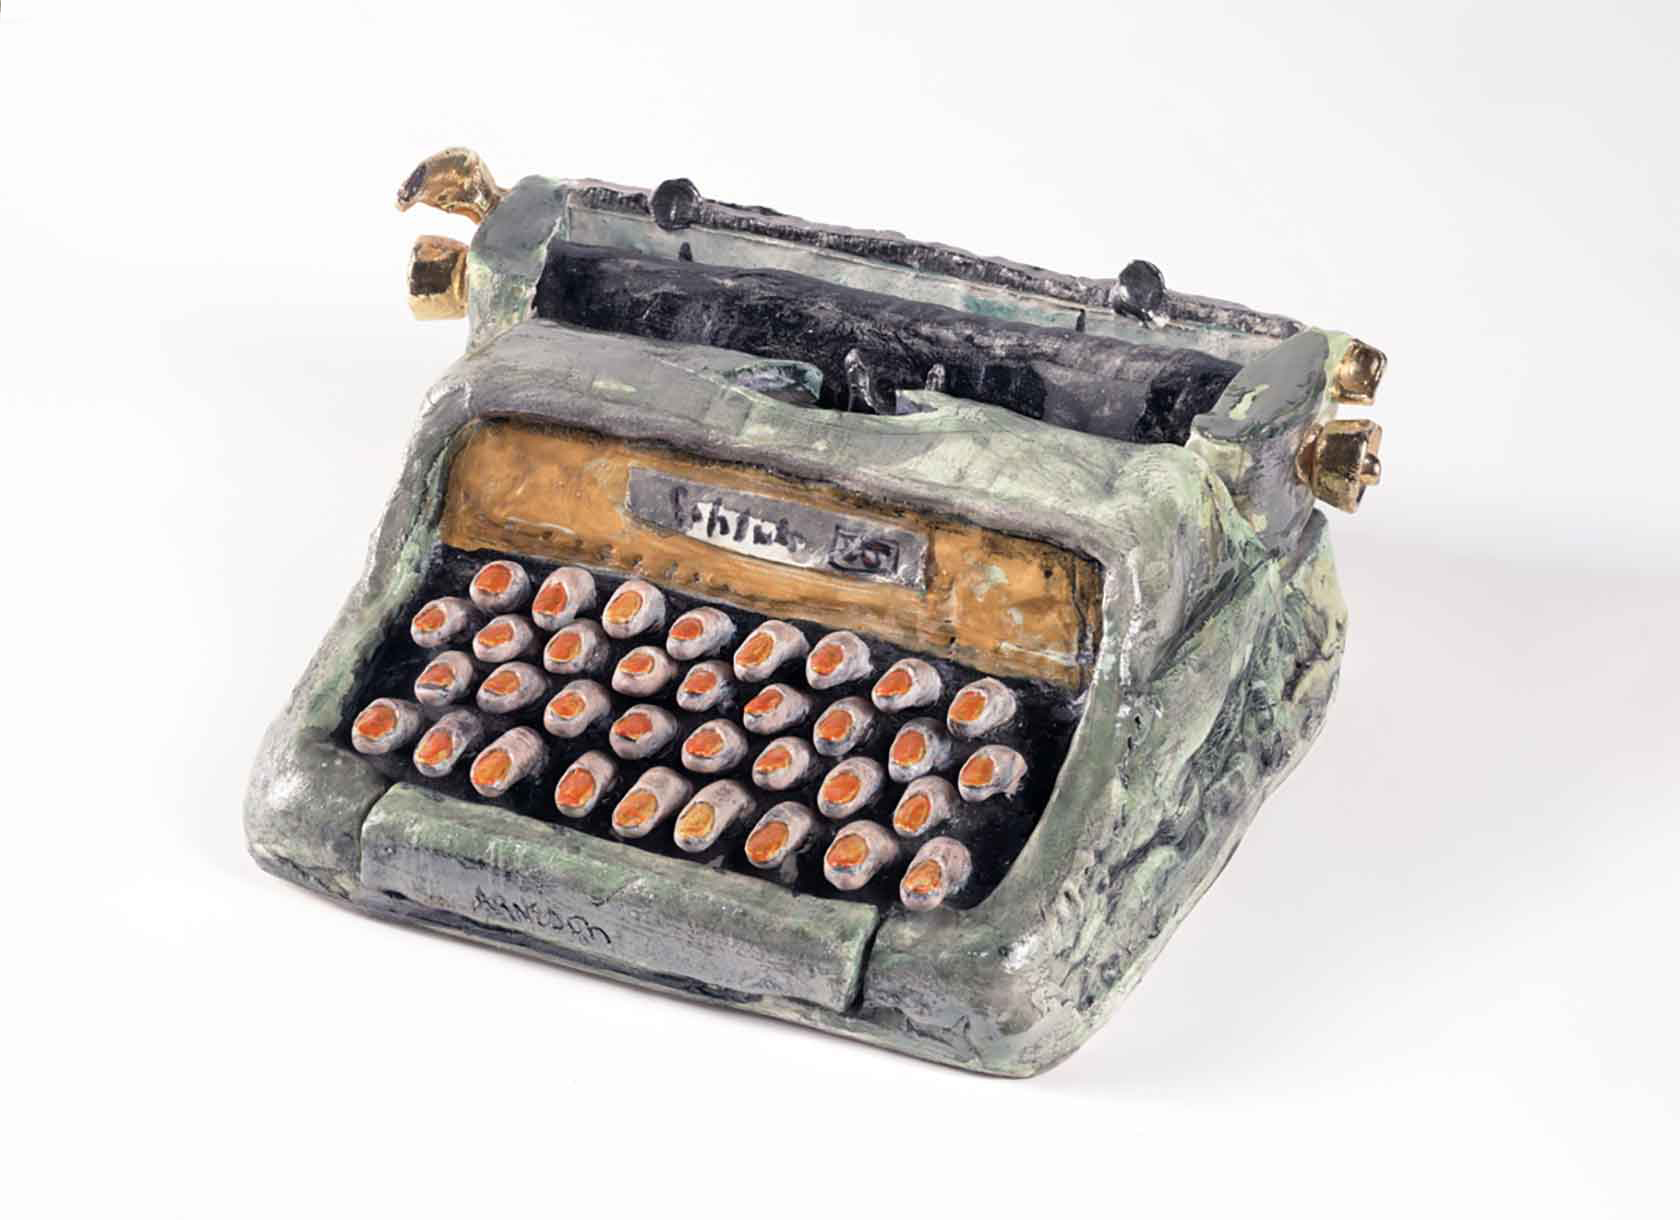 Photo of a ceramic typewriter with fingers for keys